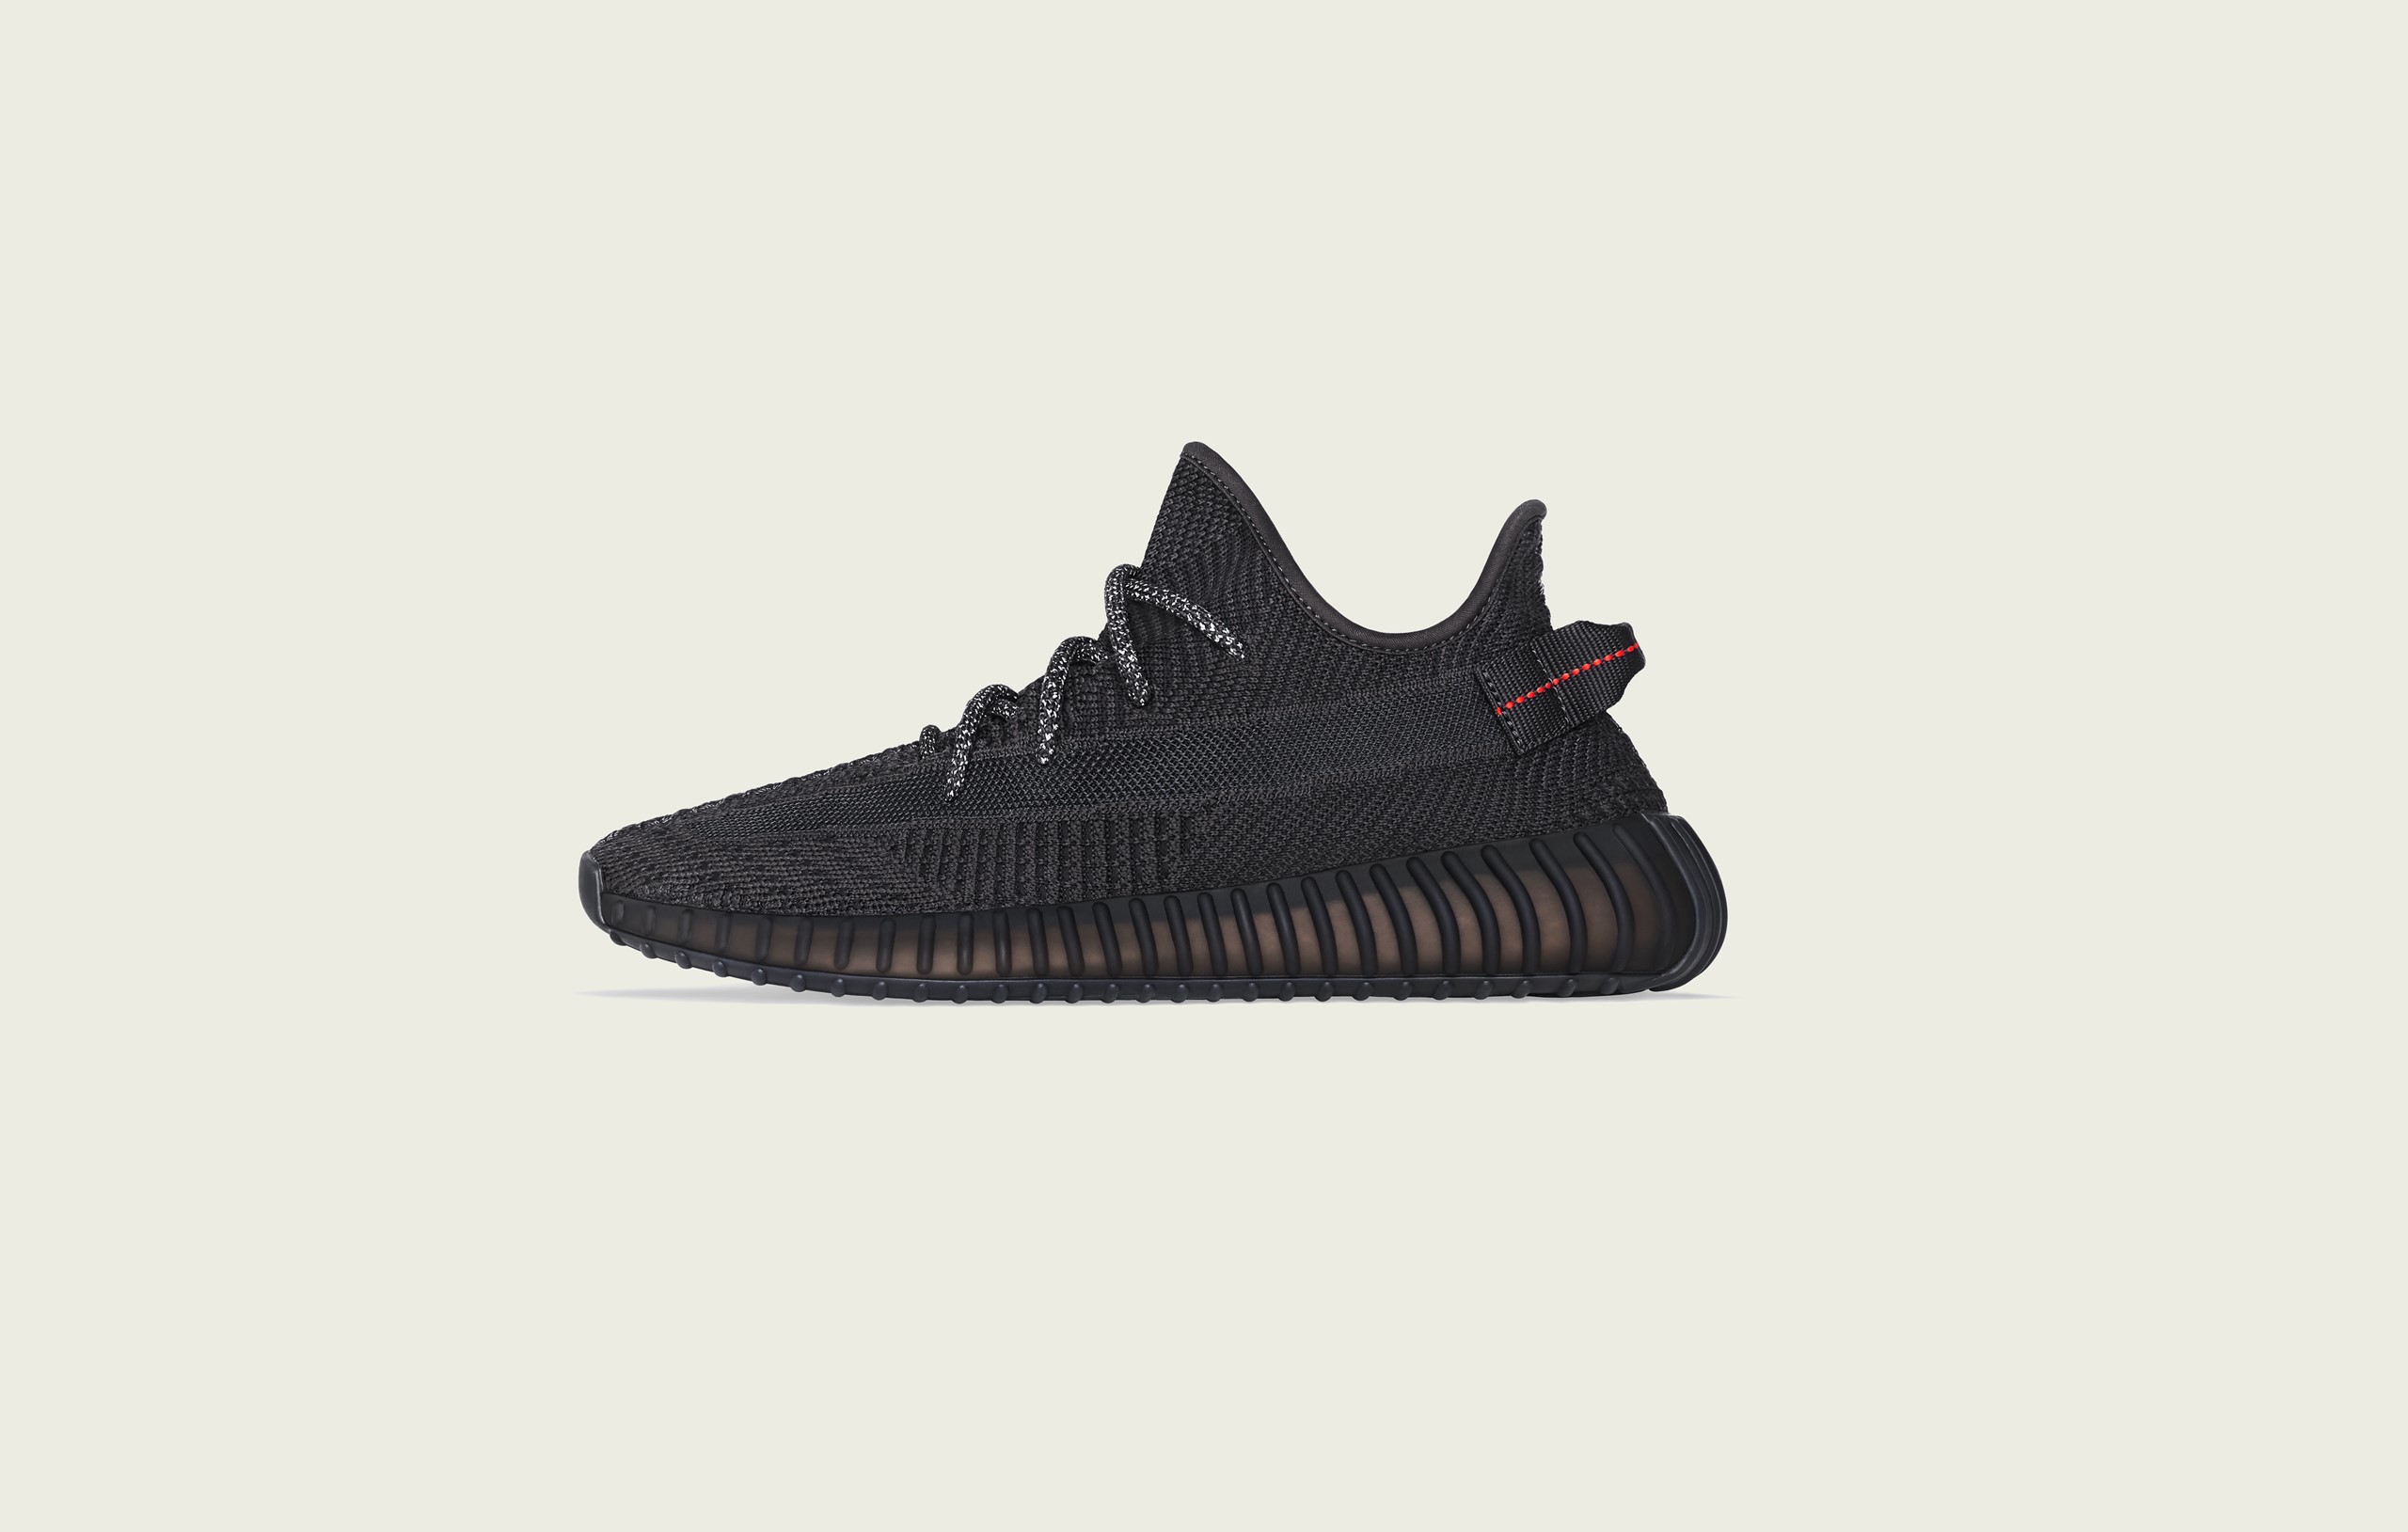 adidas Site | Press Resources for Brands, Sports and Innovations : YEEZY BOOST 350 V2